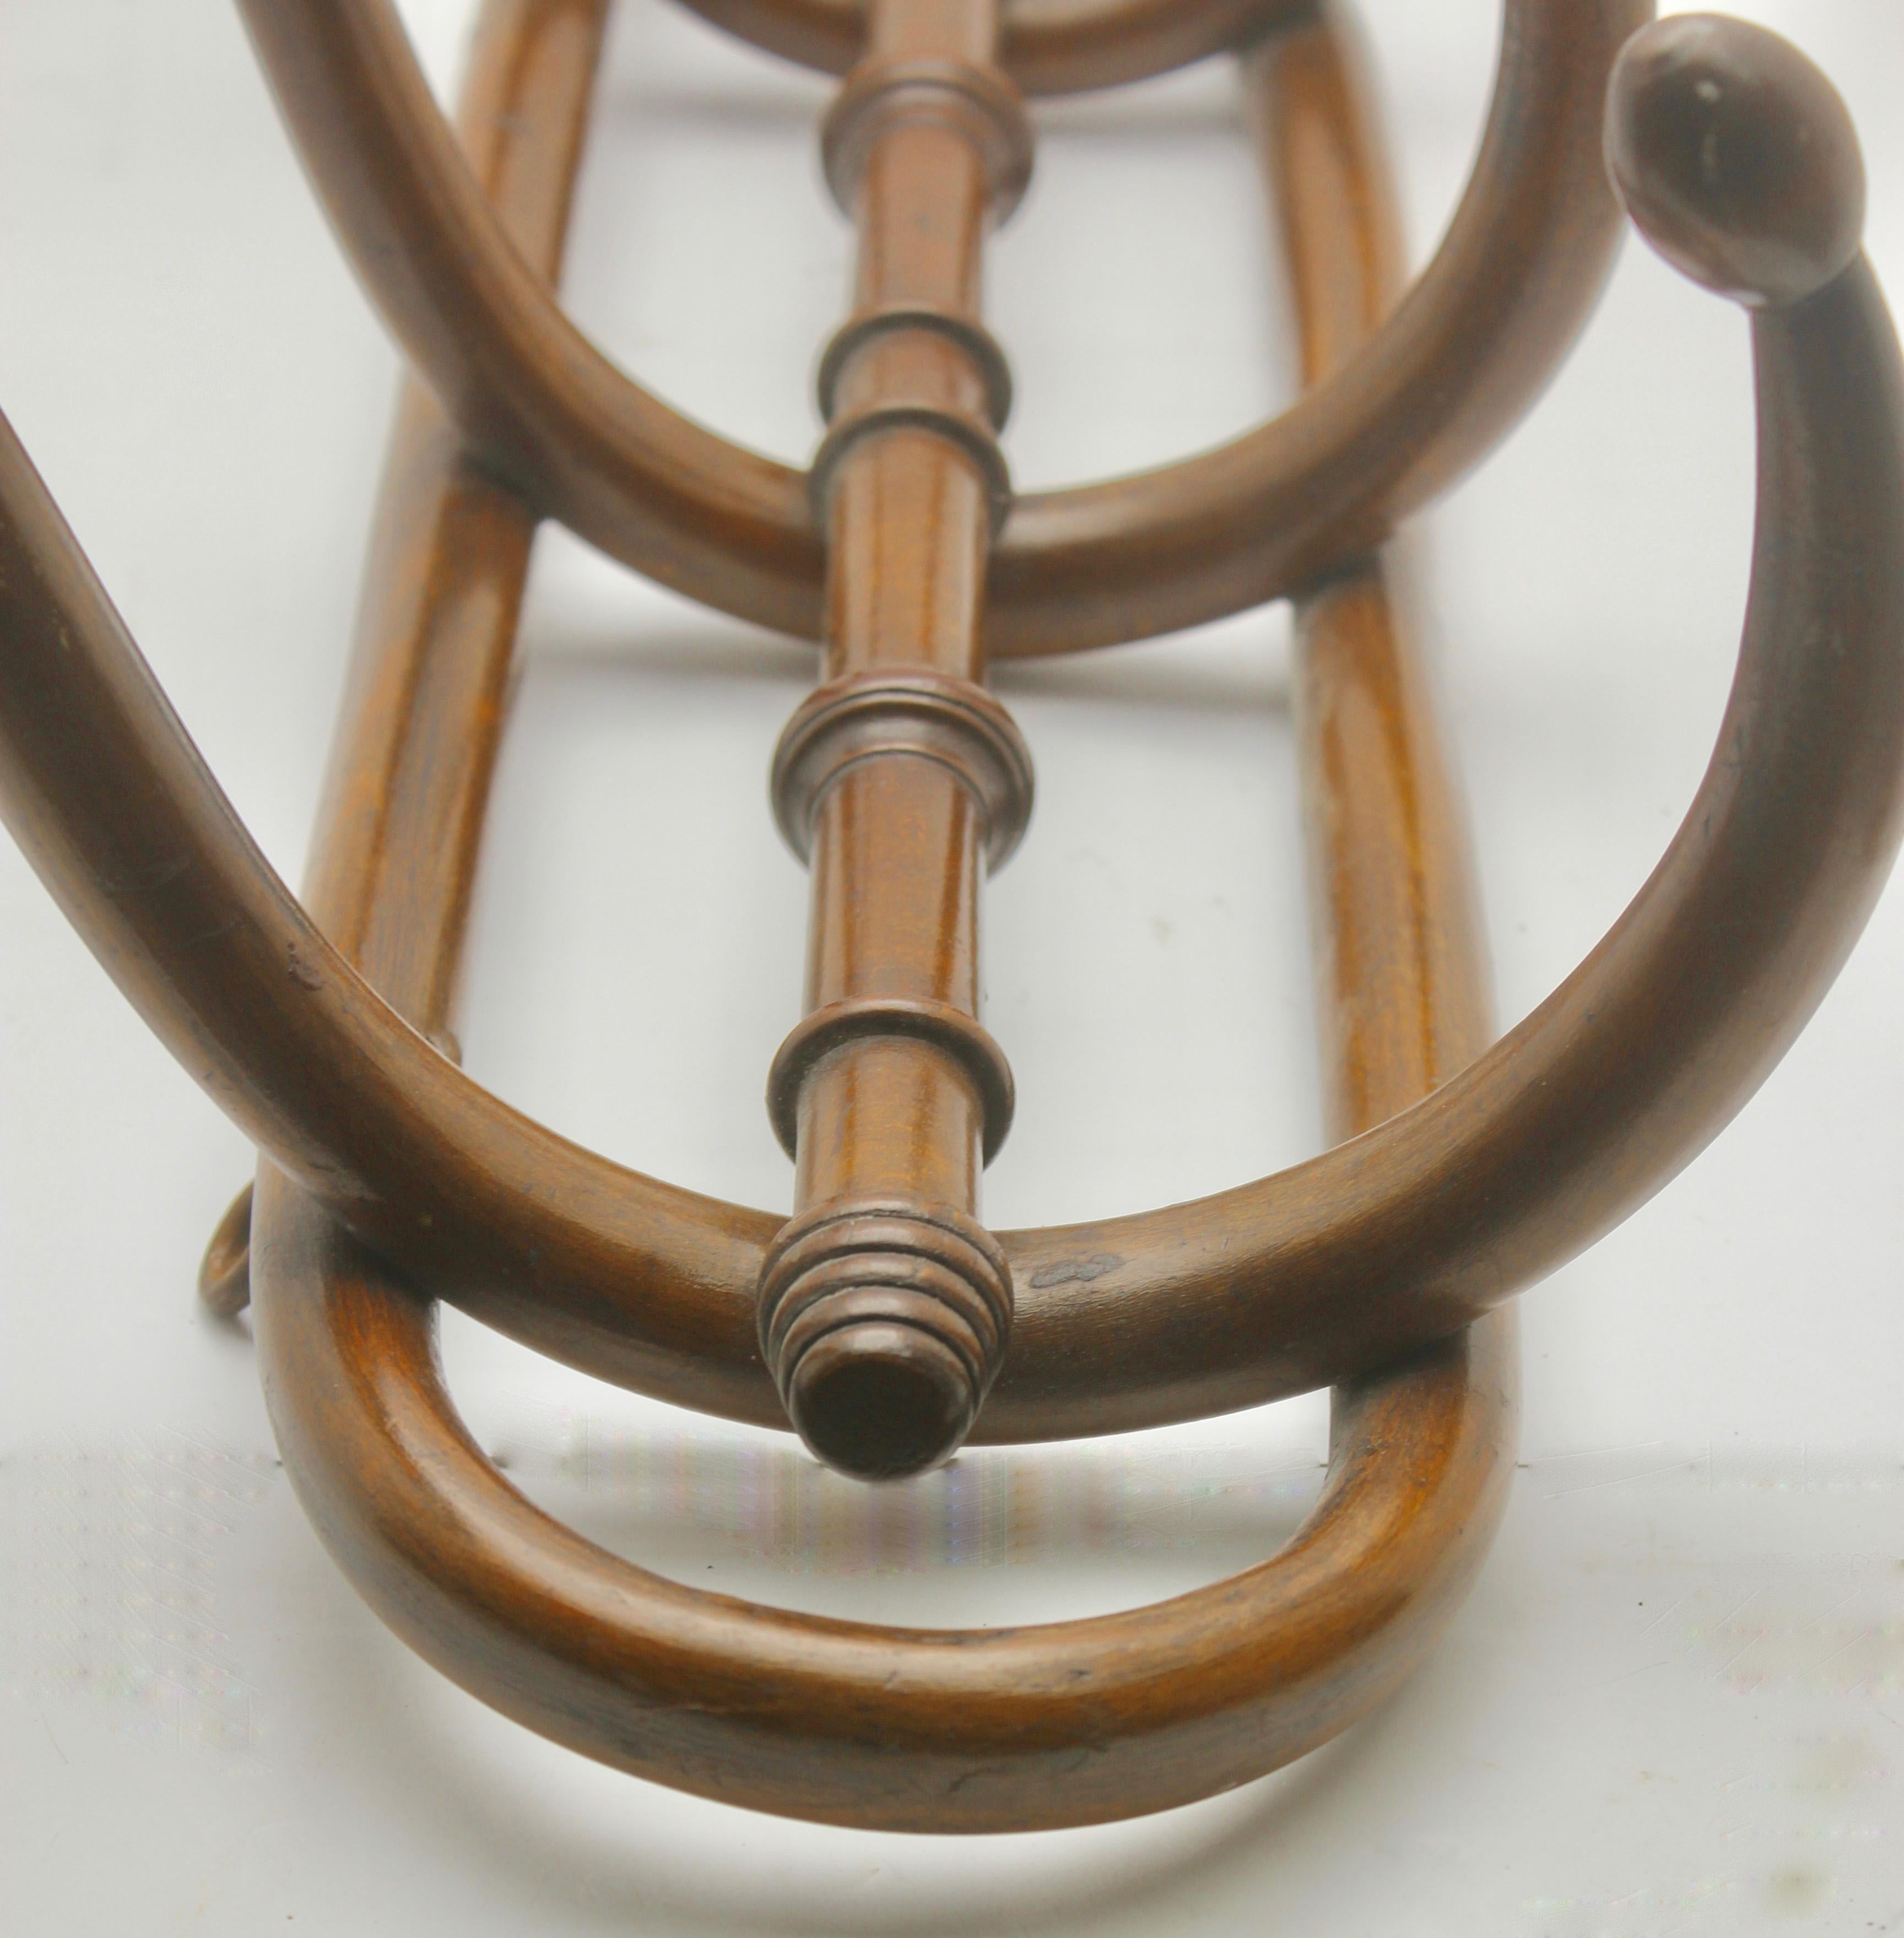 Austrian Art Nouveau Bentwood Wall Coat Rack attributed to Thonet, Vienna, 1910s